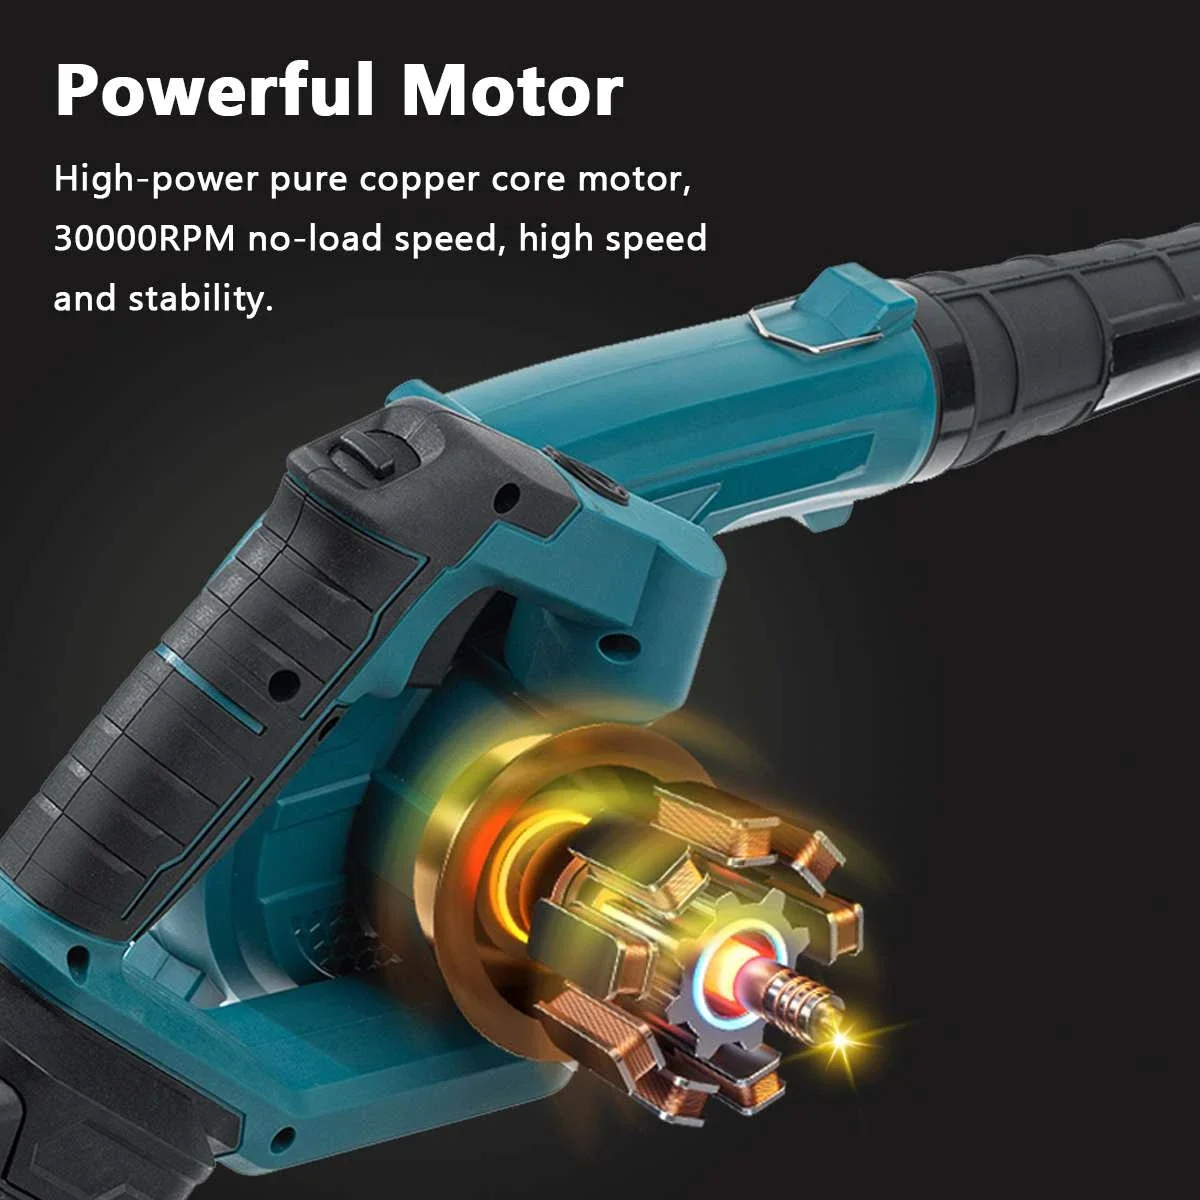 Kamolee 20000rpm Cordless Electric Blower 2-in-1 Vacuum Cleaner for Makita 18V Battery - Perfect for Home DIY Projects images - 6